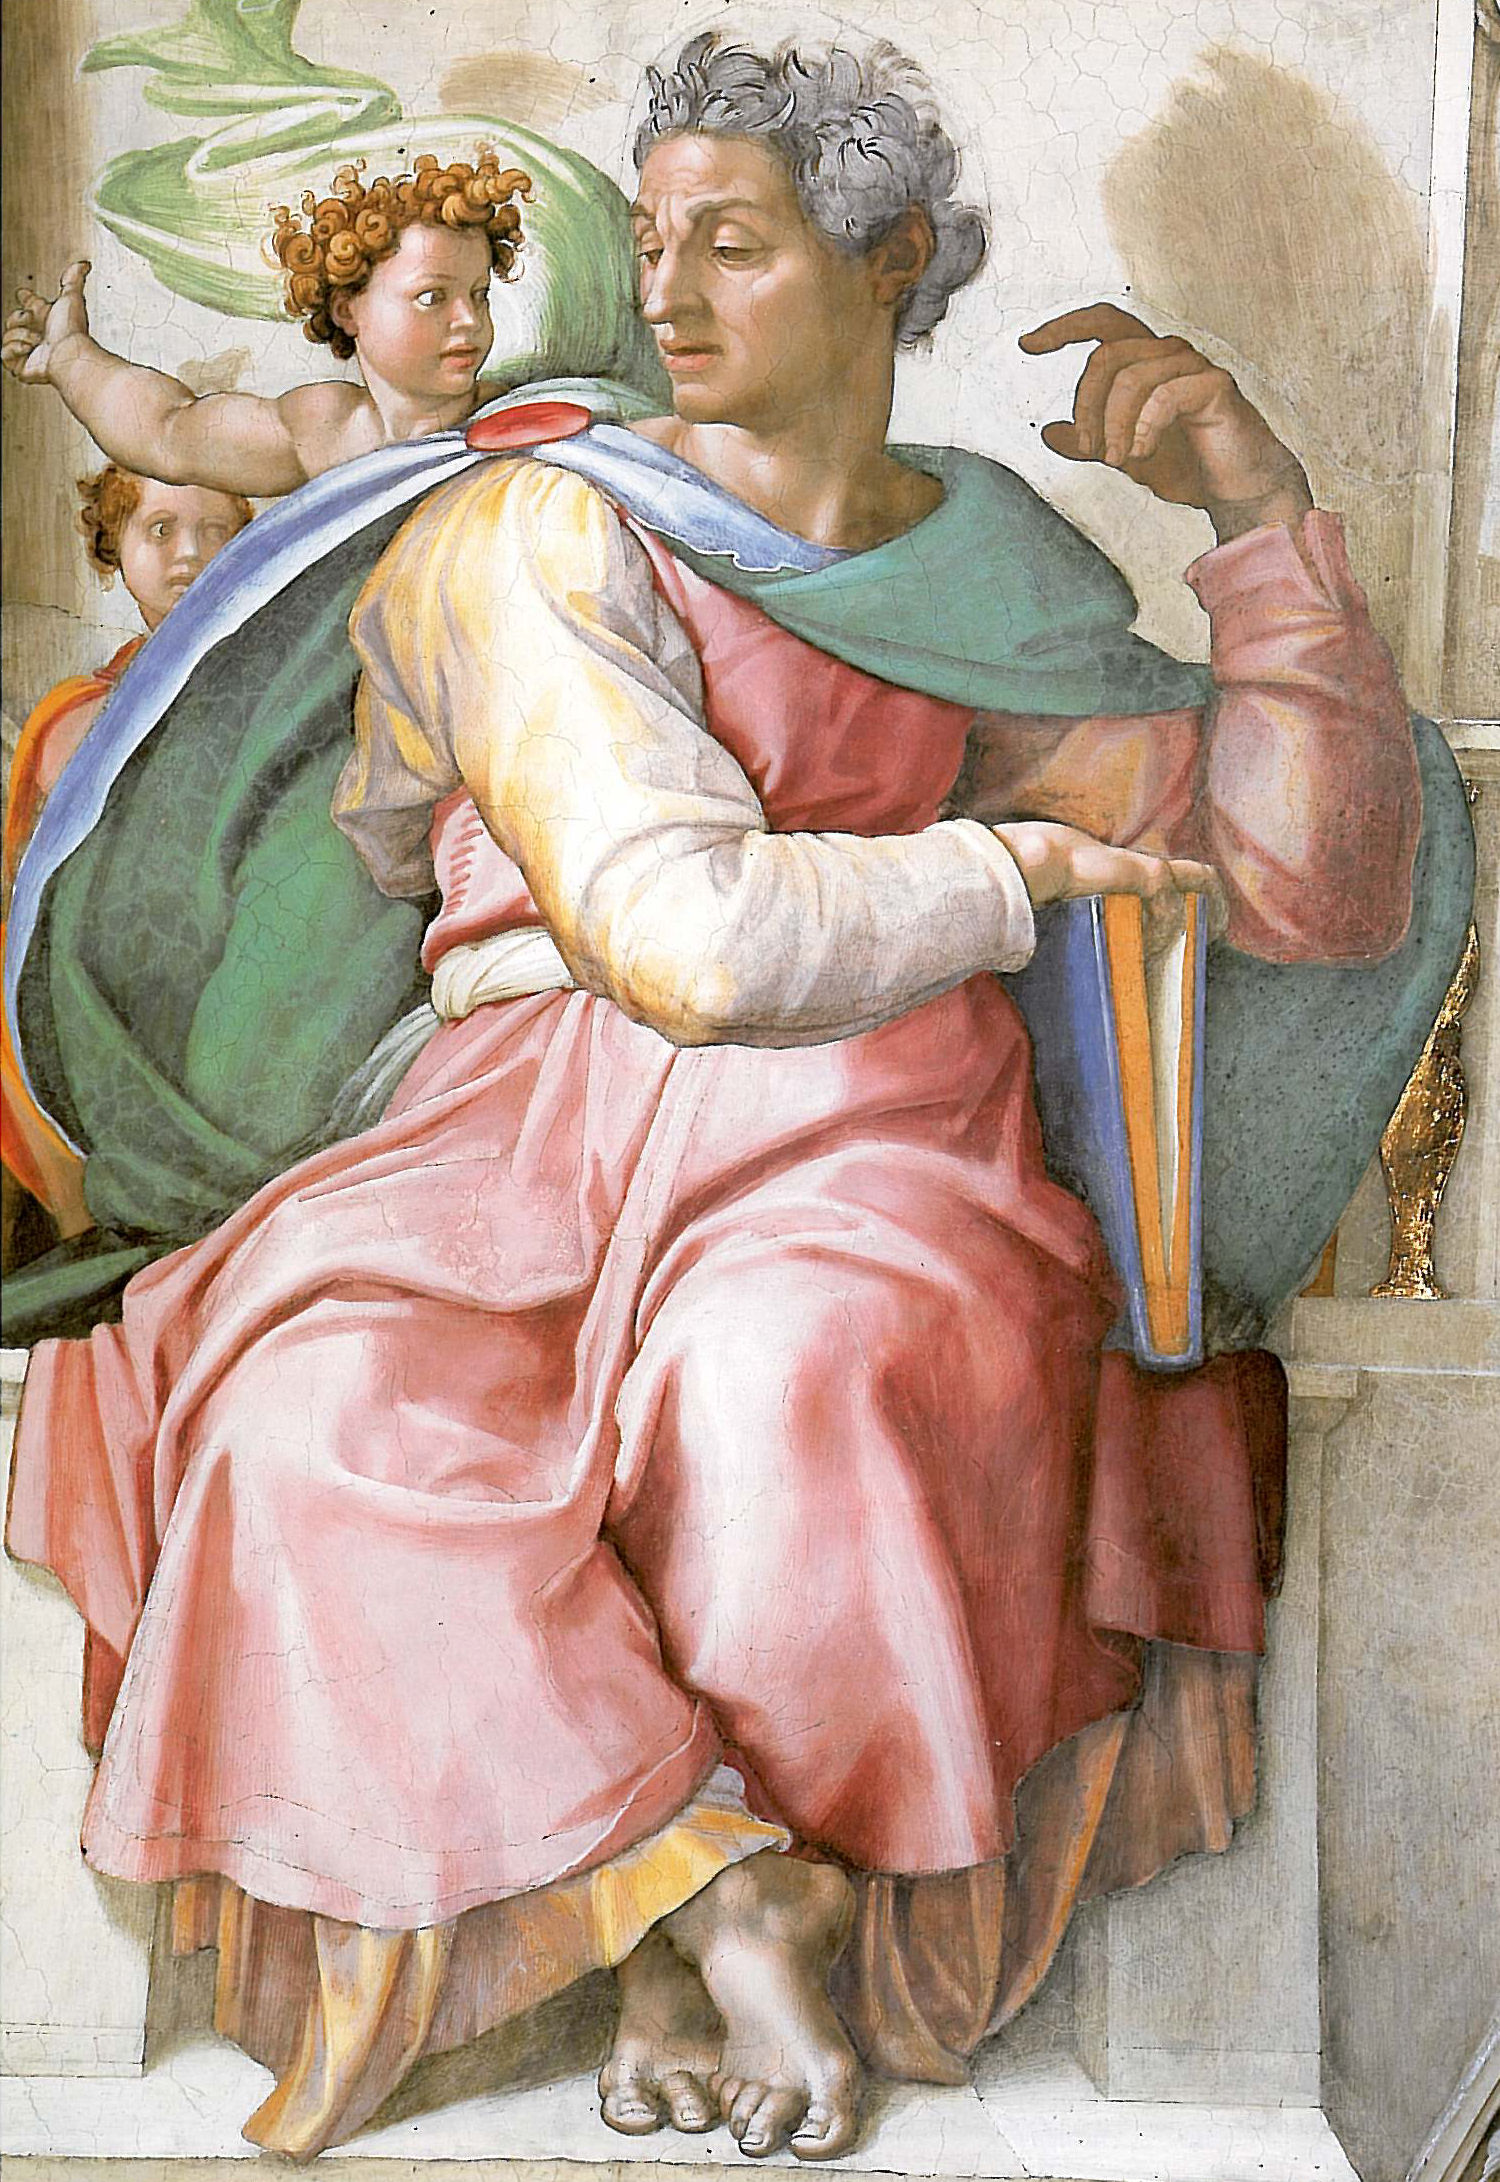 Michelangelo, The Prophet Isaiah, from the Sistine Ceiling, 1508-1512.